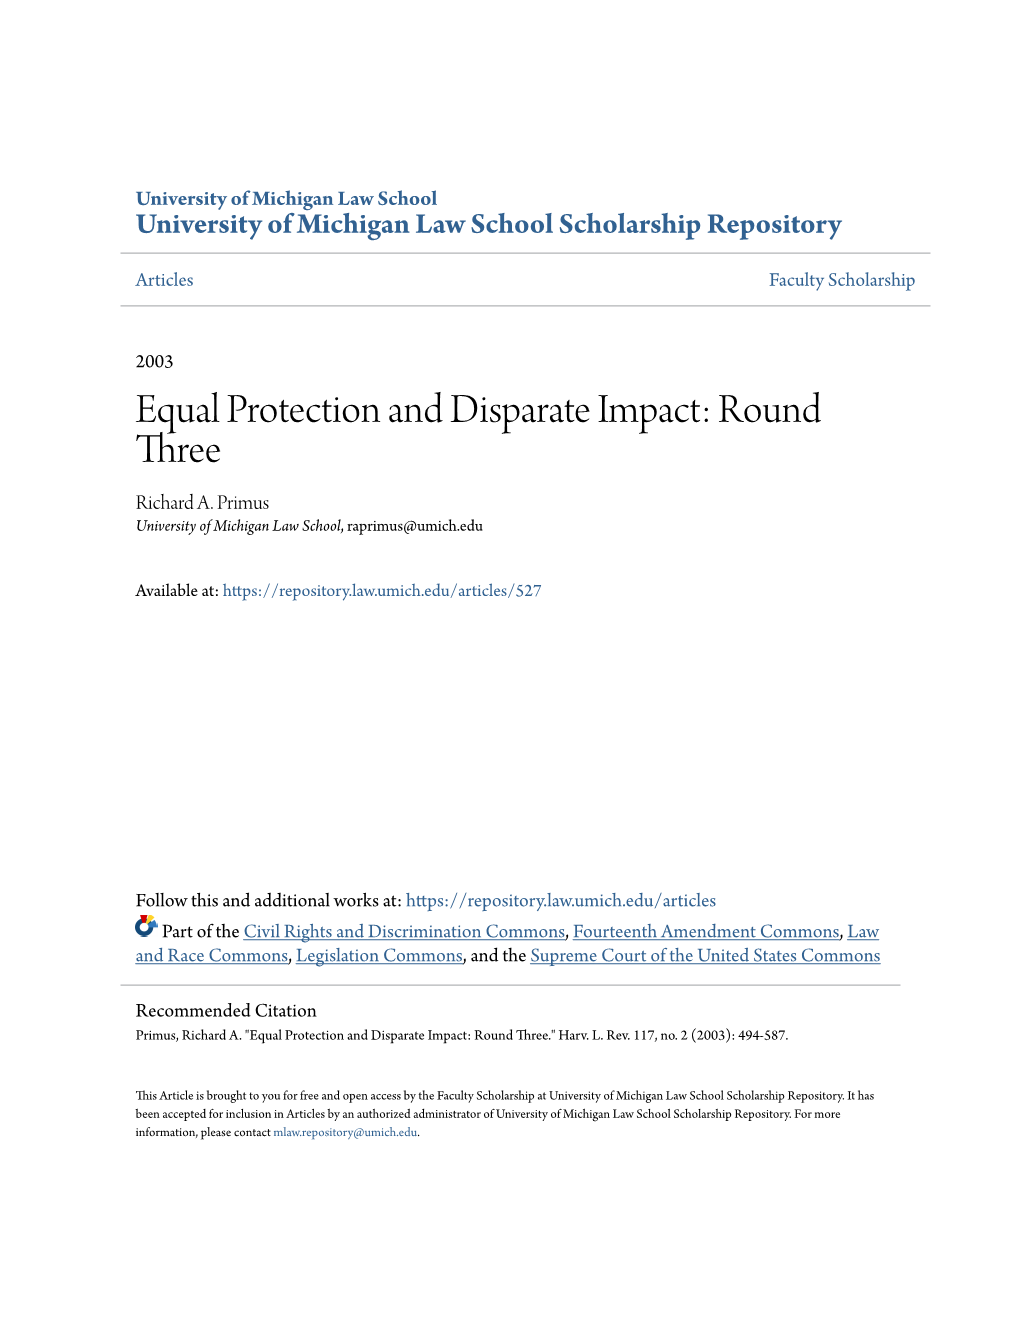 Equal Protection and Disparate Impact: Round Three Richard A